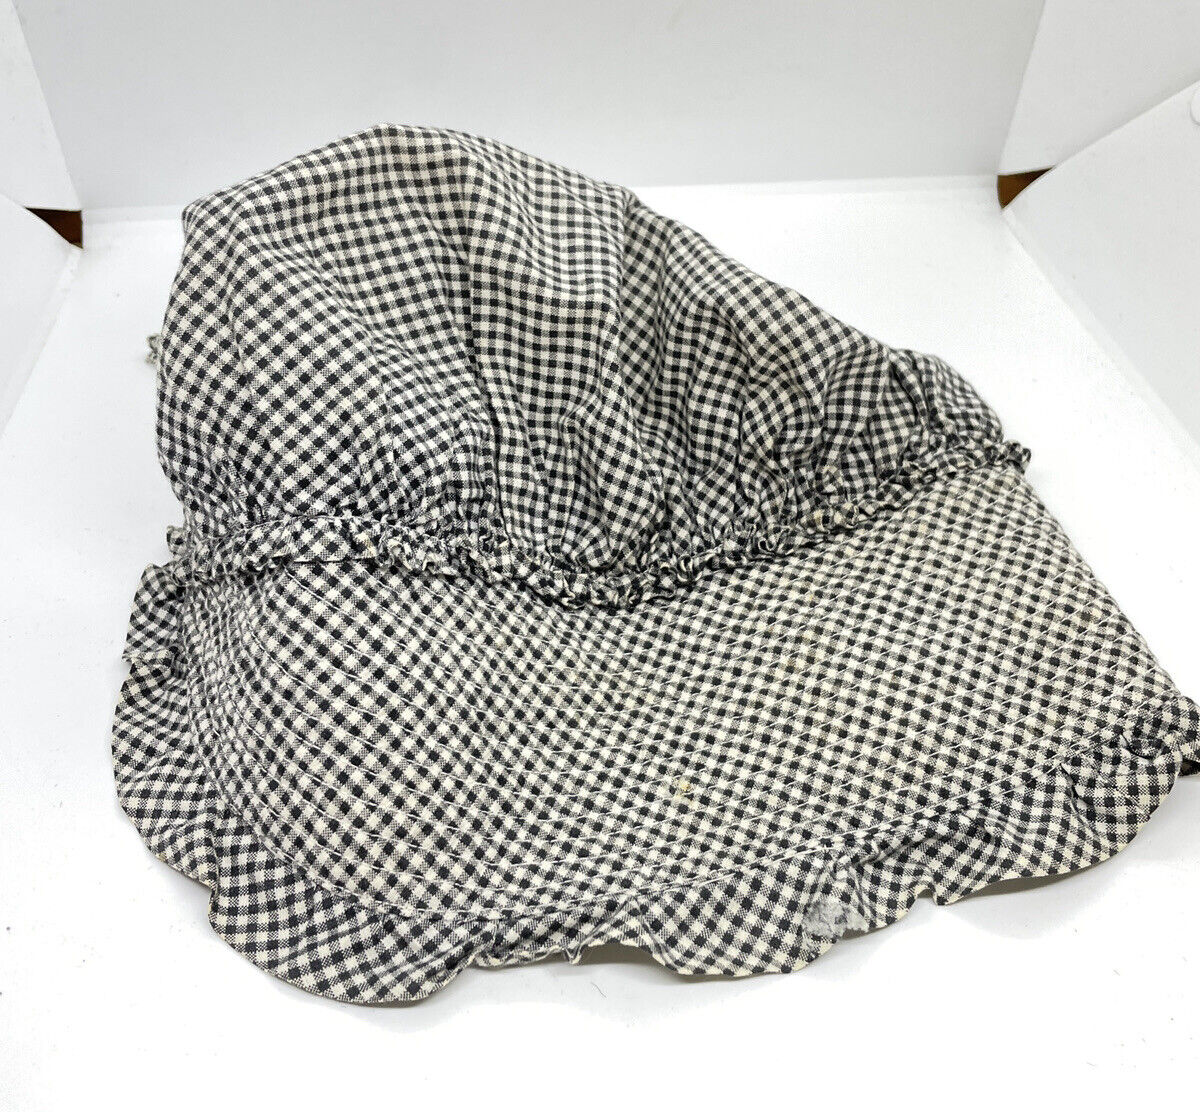 Large Vintage Black And White Checkered Bonnet Size 23”